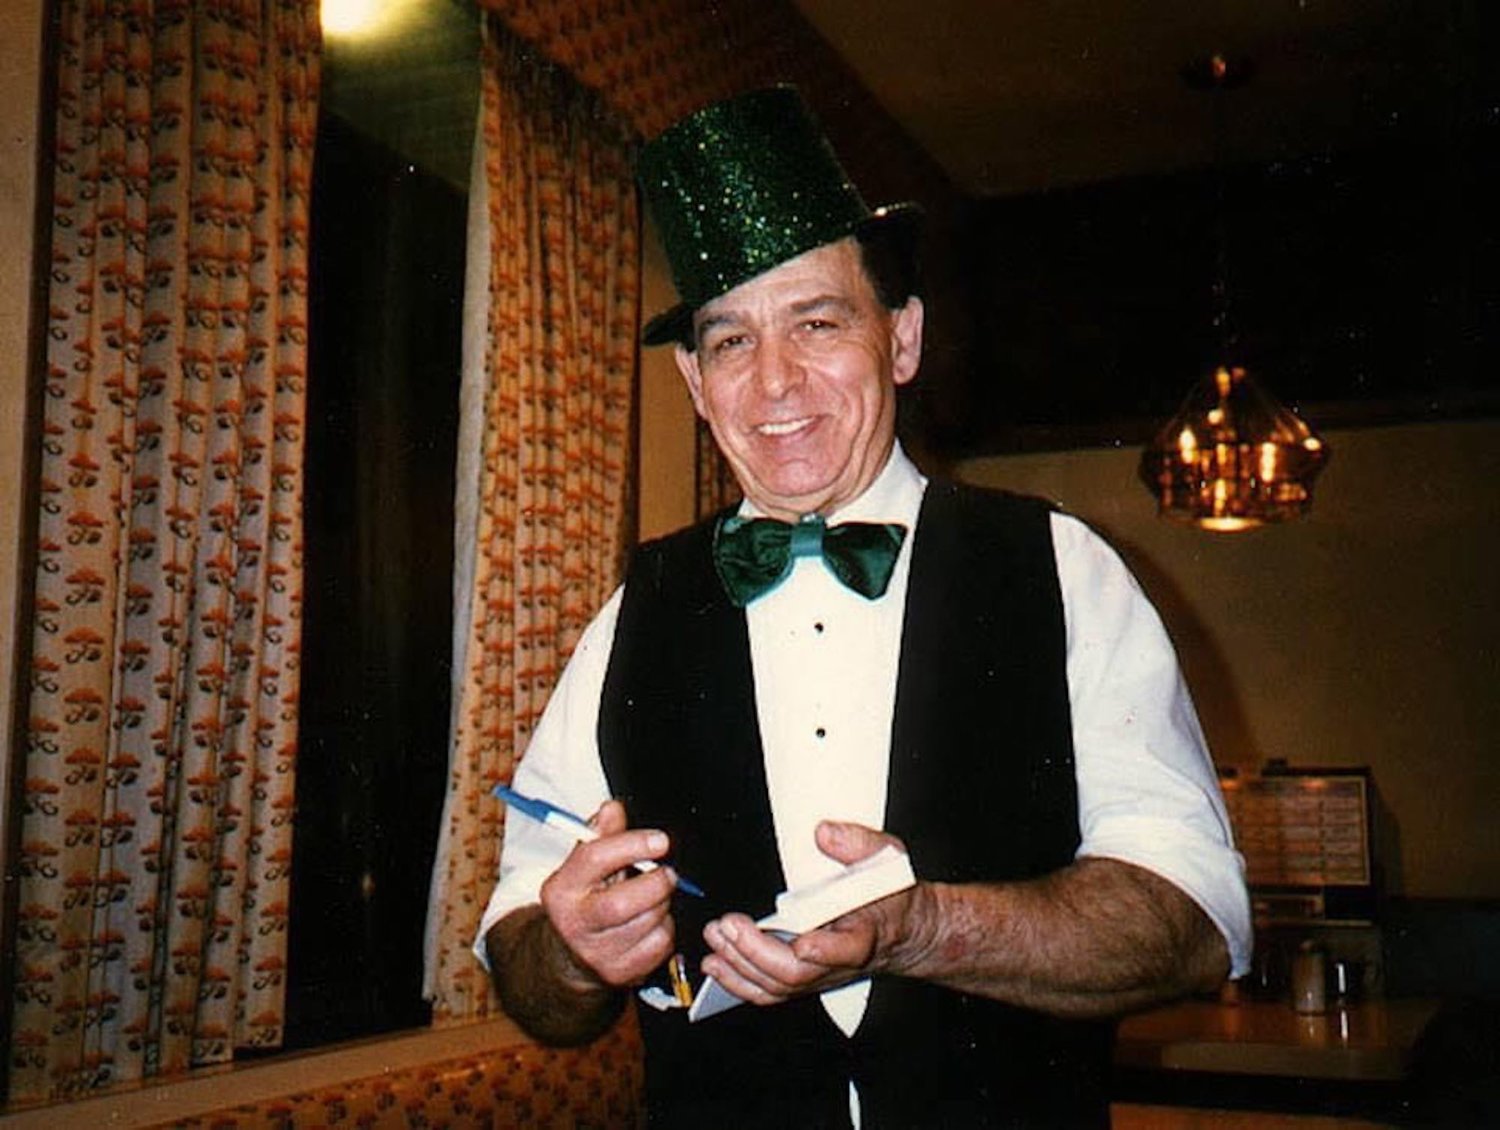 Victor Morfessis dressed up for St. Patrick’s Day in the 1990s.